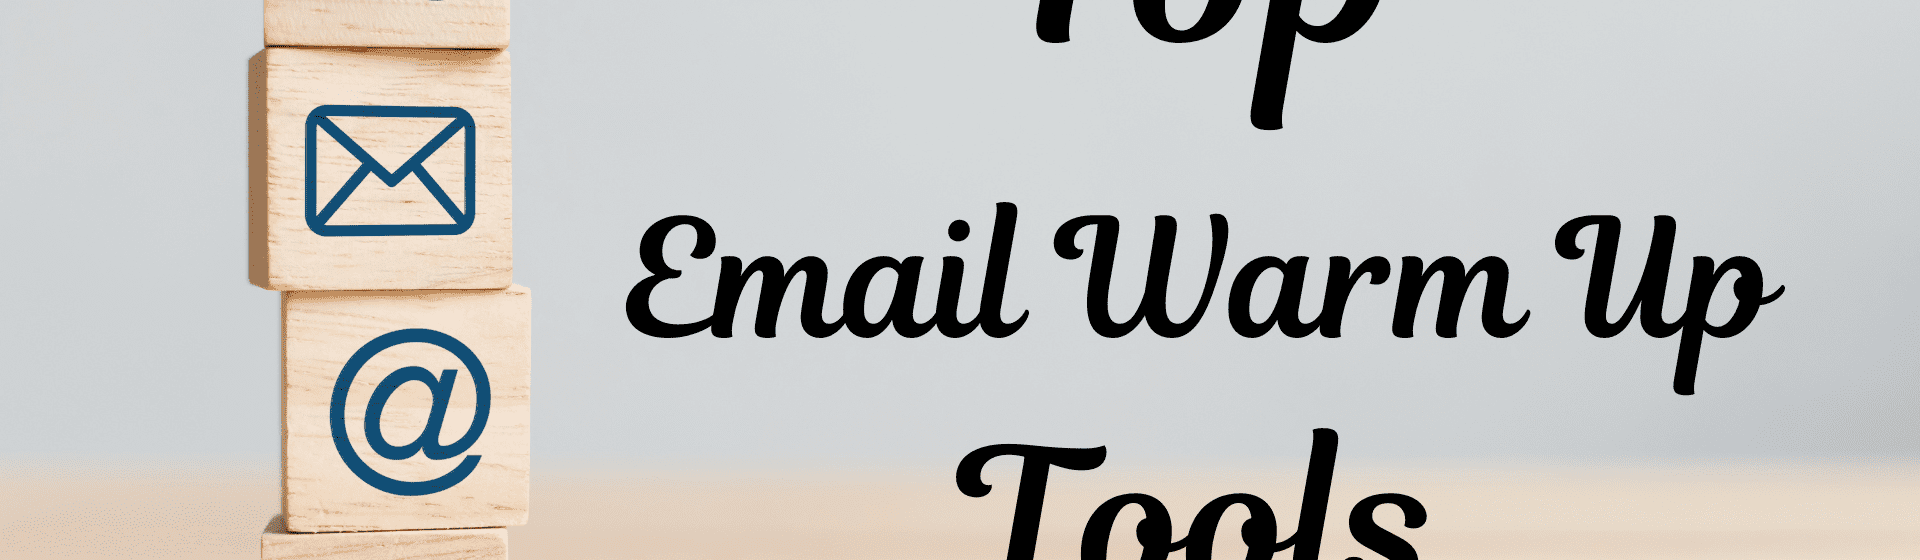 Top 5 email warm-up tools for your B2B Lead Generation outreach campaigns